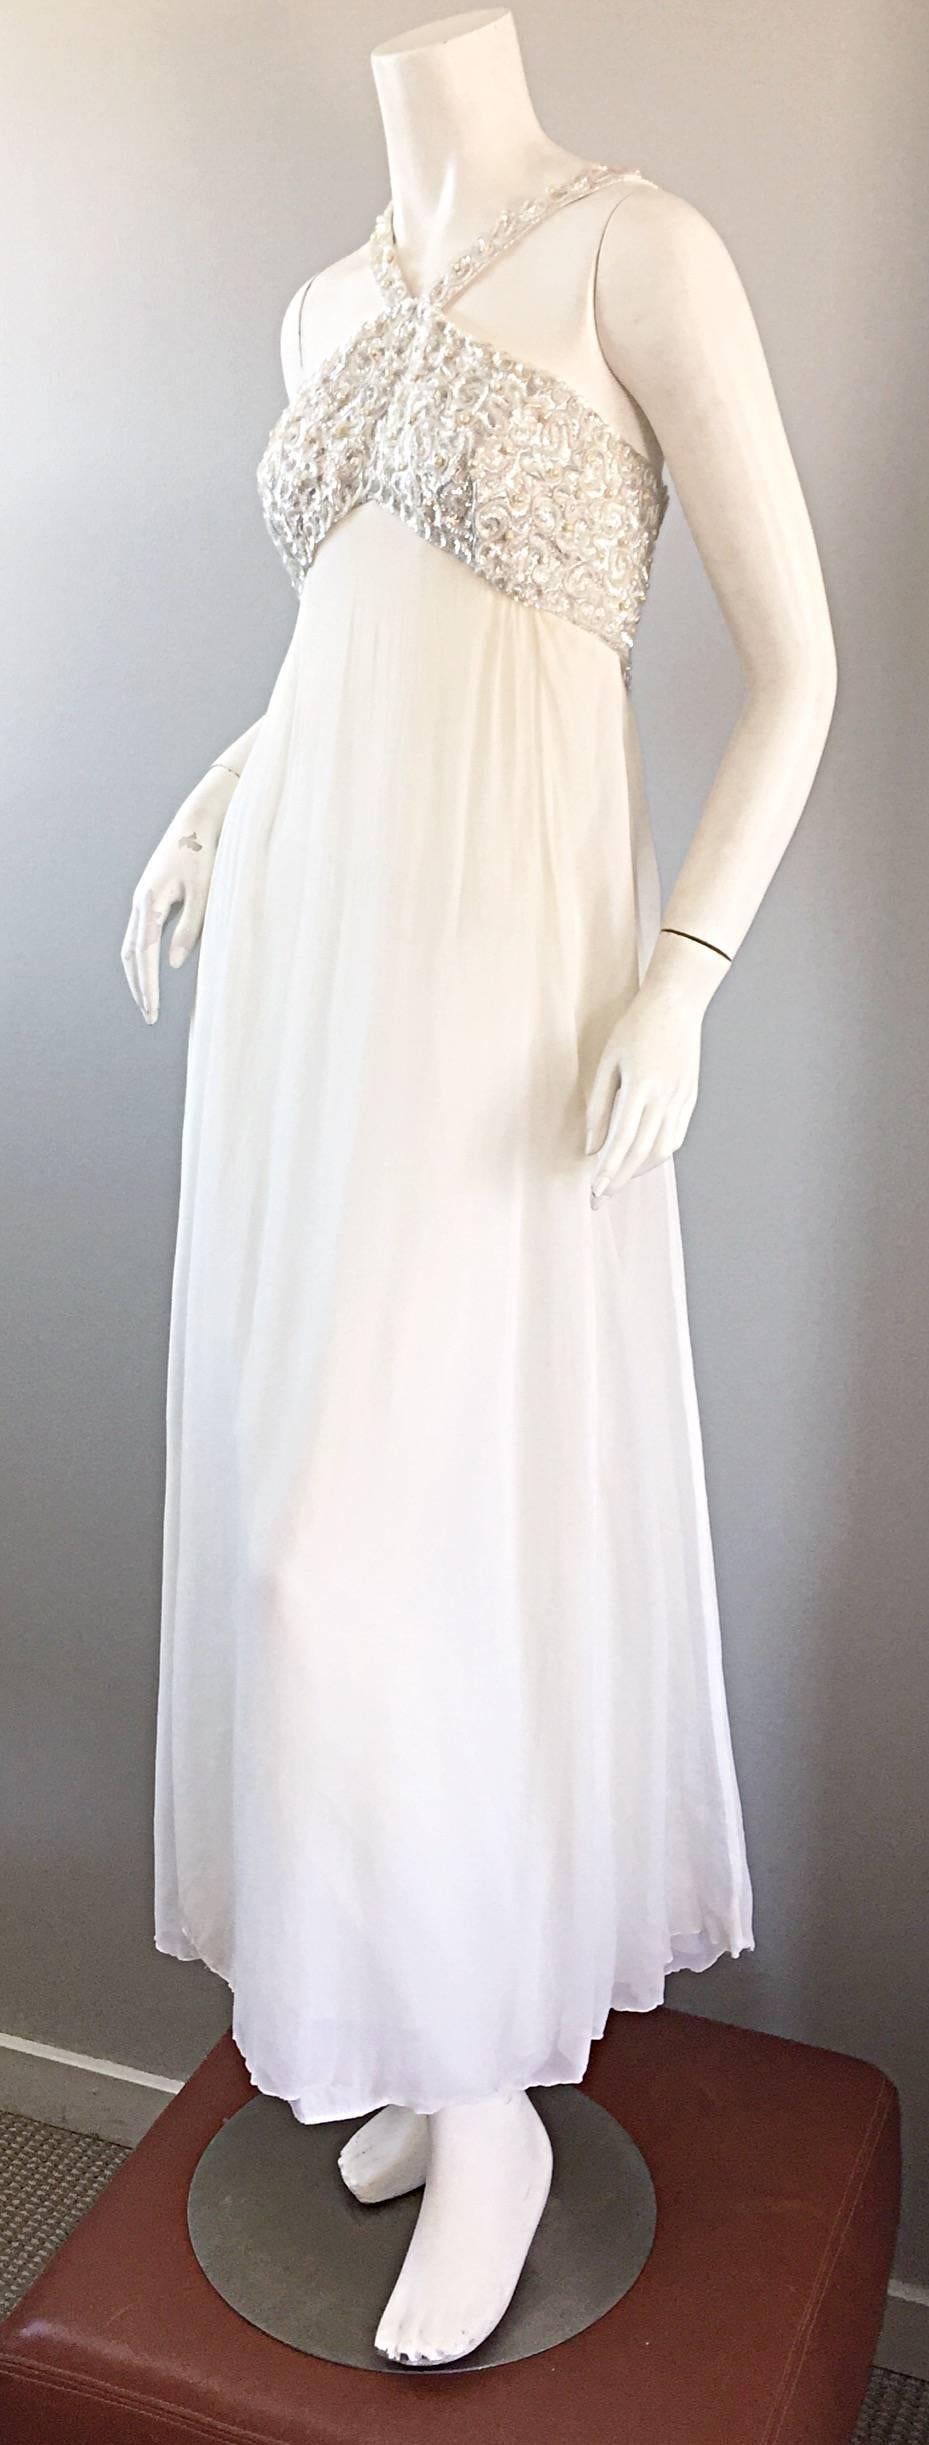 Ethereal Emma Domb 1960s White Chiffon Sequins + Pearls 60s Empire Waist Gown  2